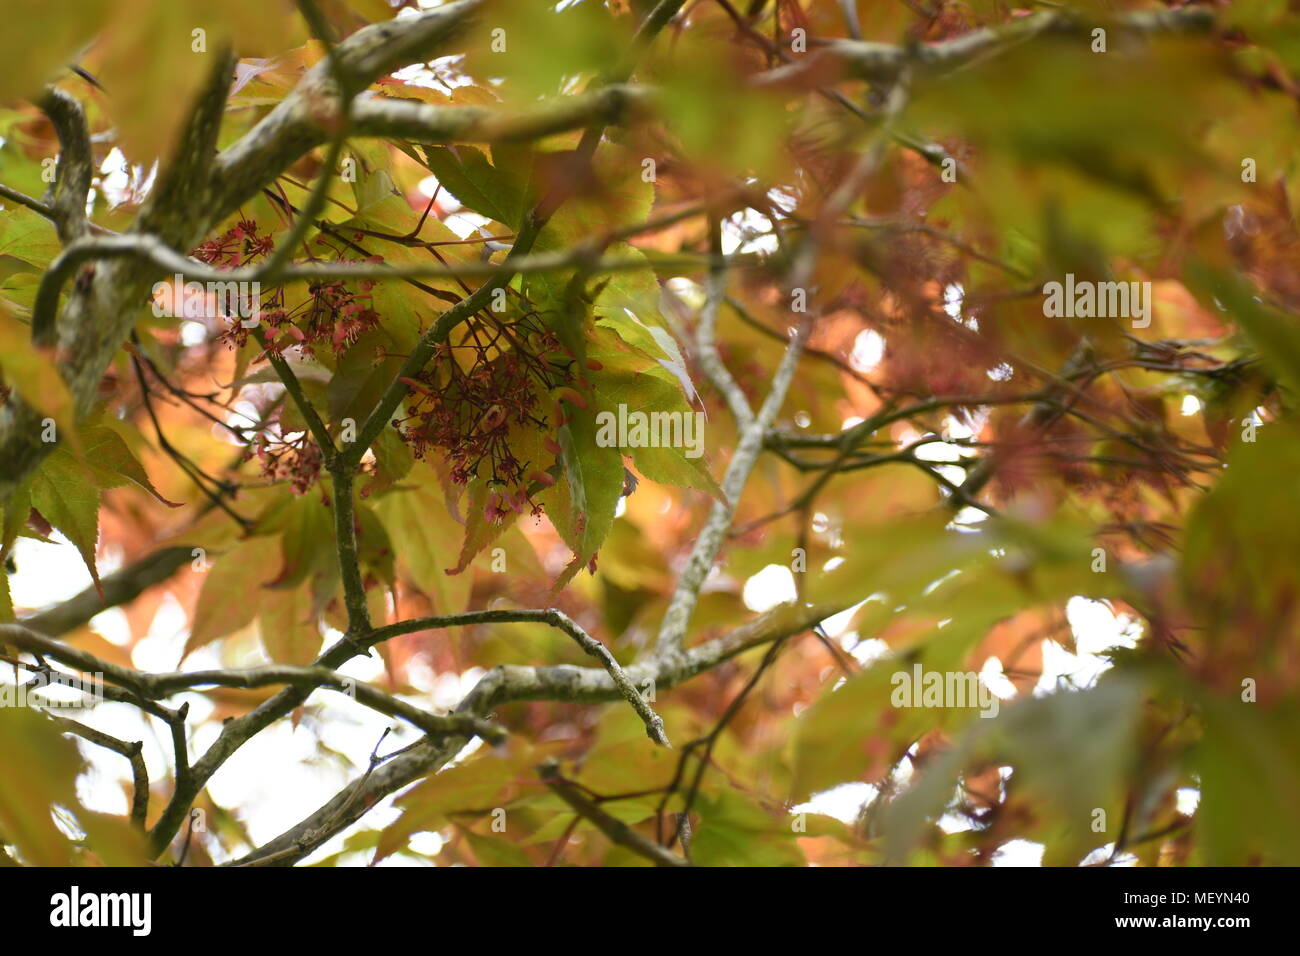 View from underneath a Japanese Maple Tree Stock Photo